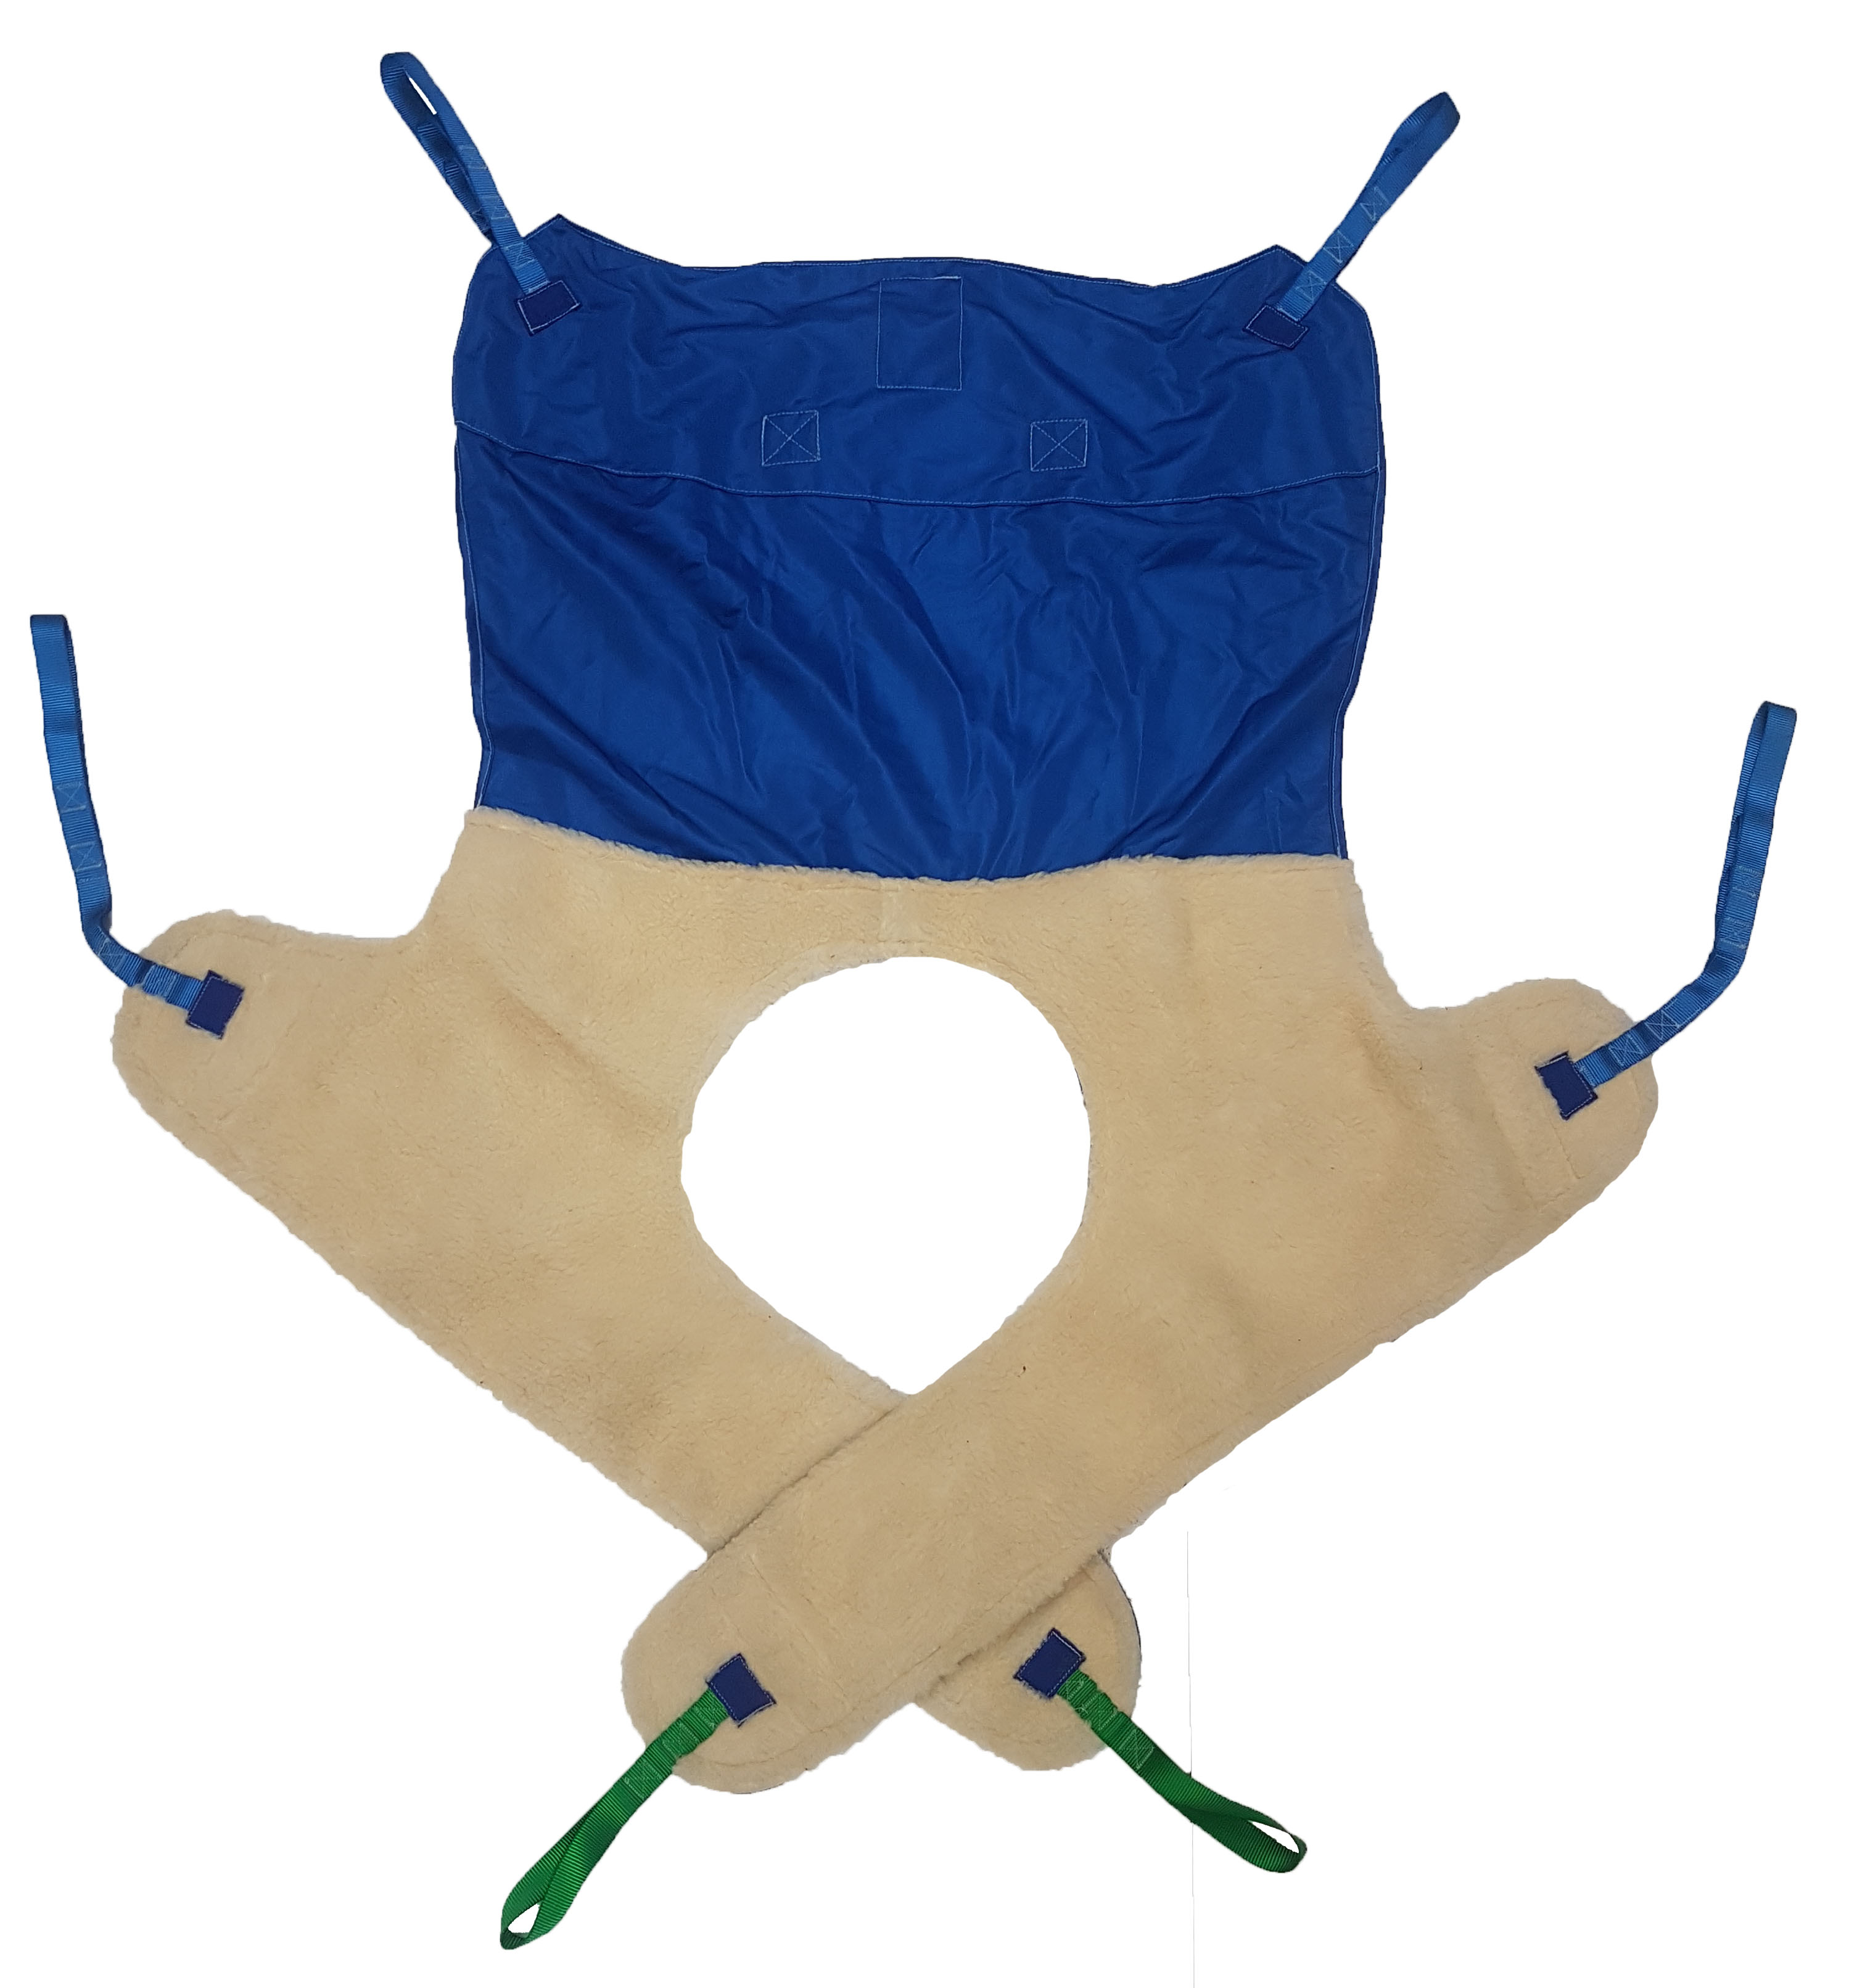 Stapleford Amputee Patient Sling 1